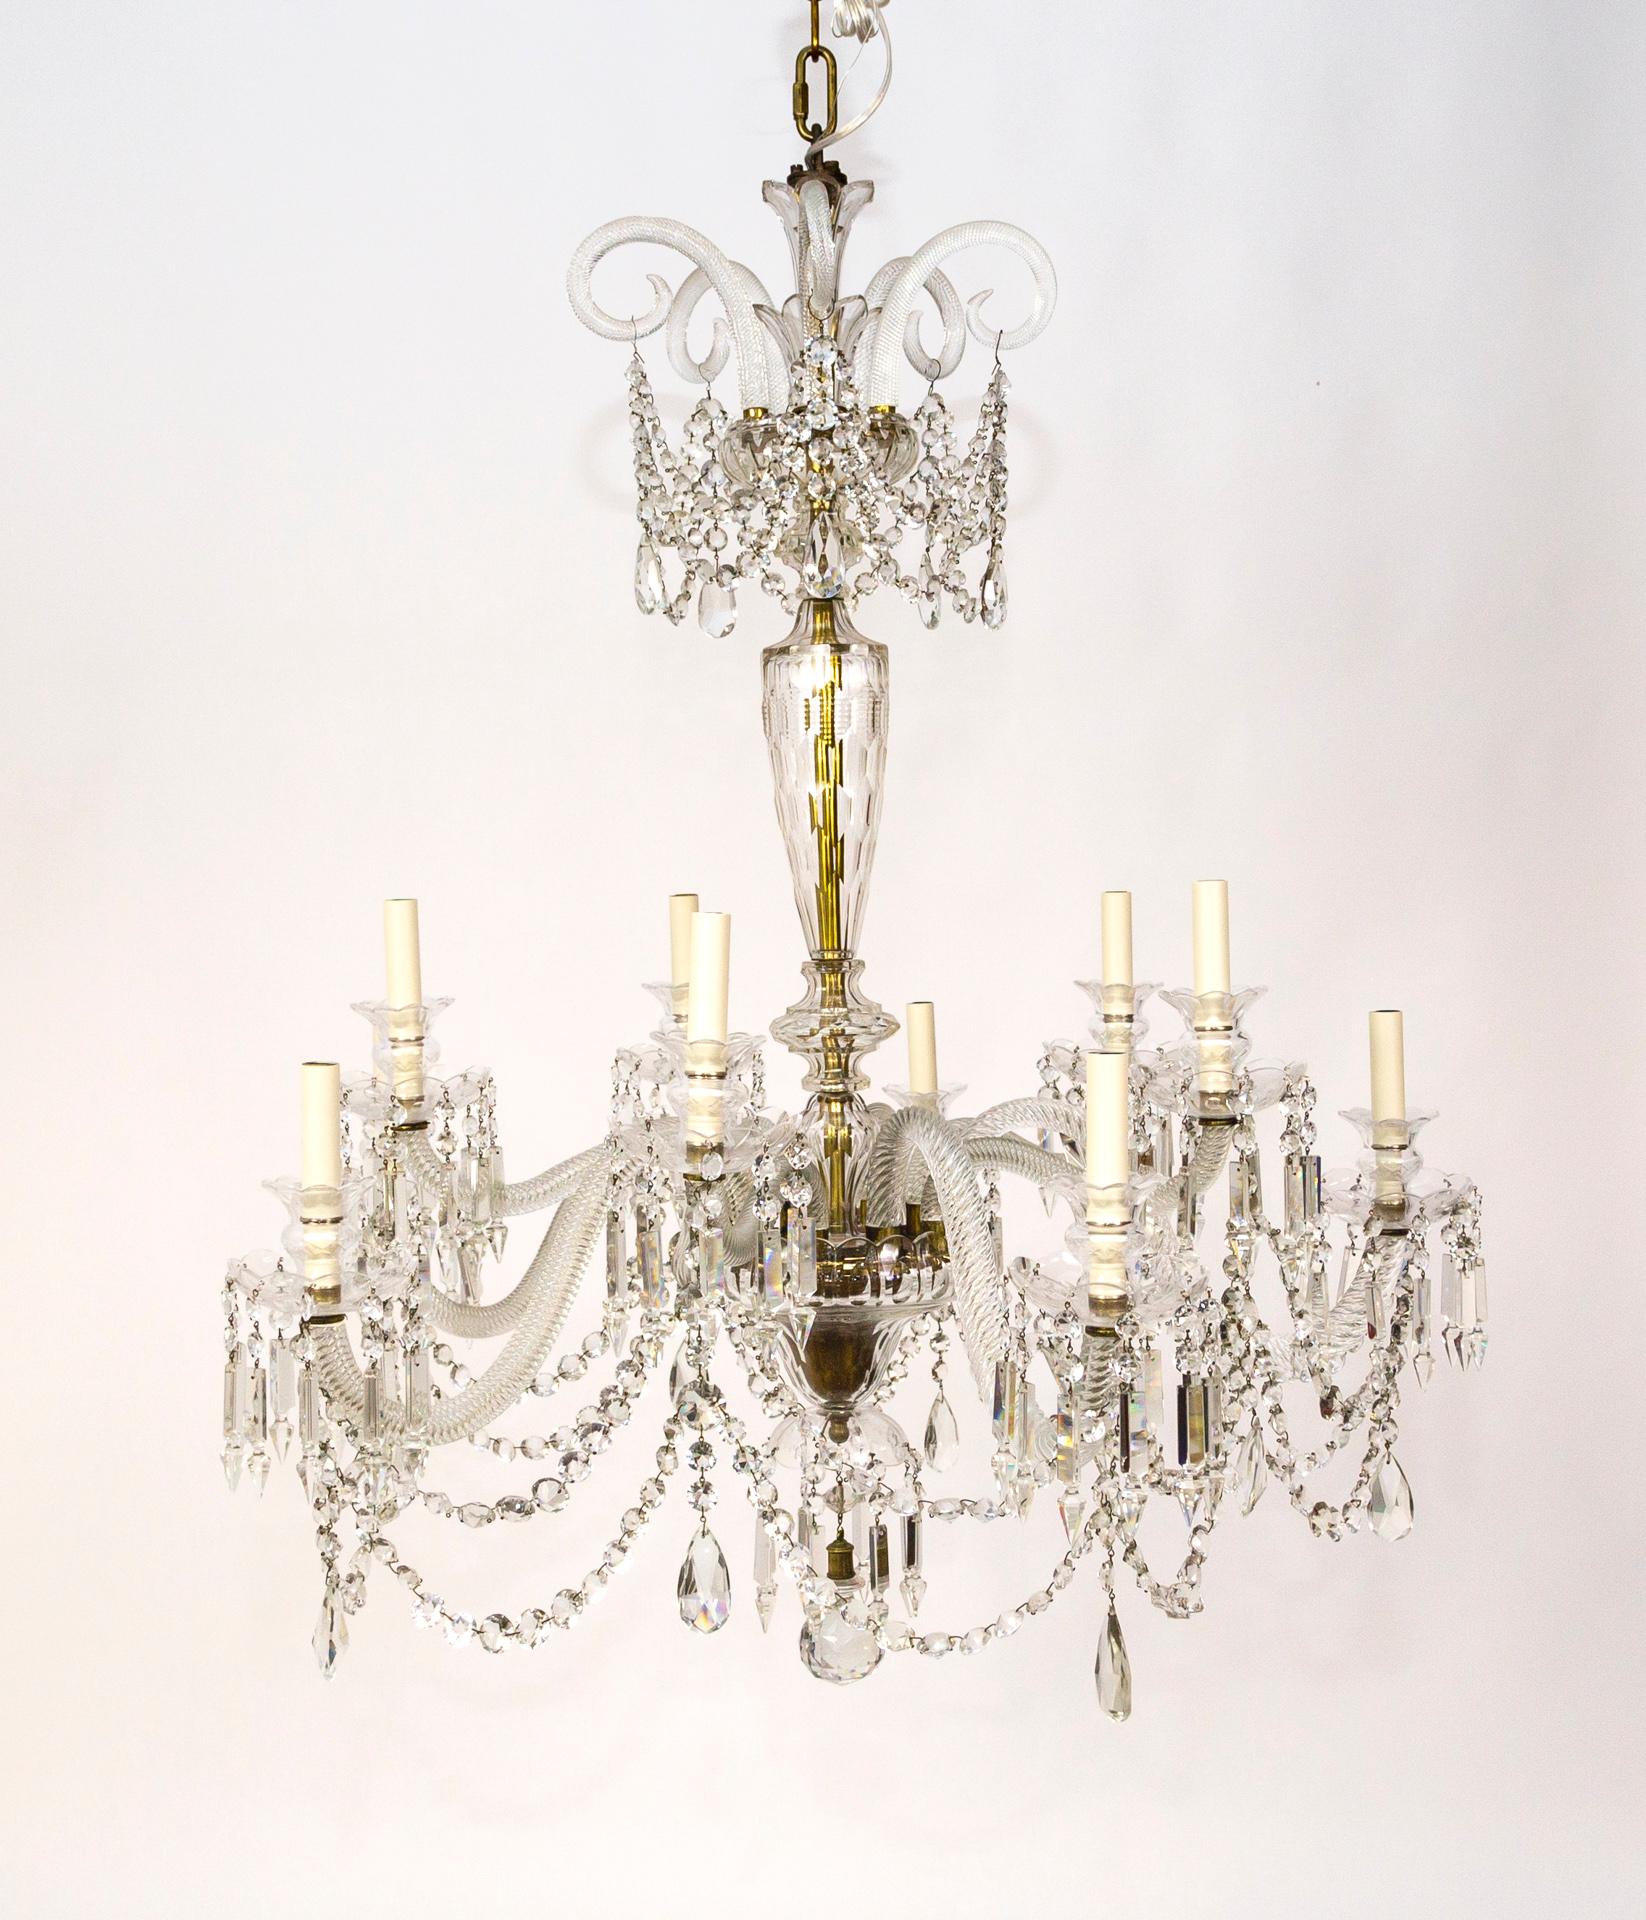 Grand Cut Crystal George III Chandelier w/ Faceted Column  For Sale 3